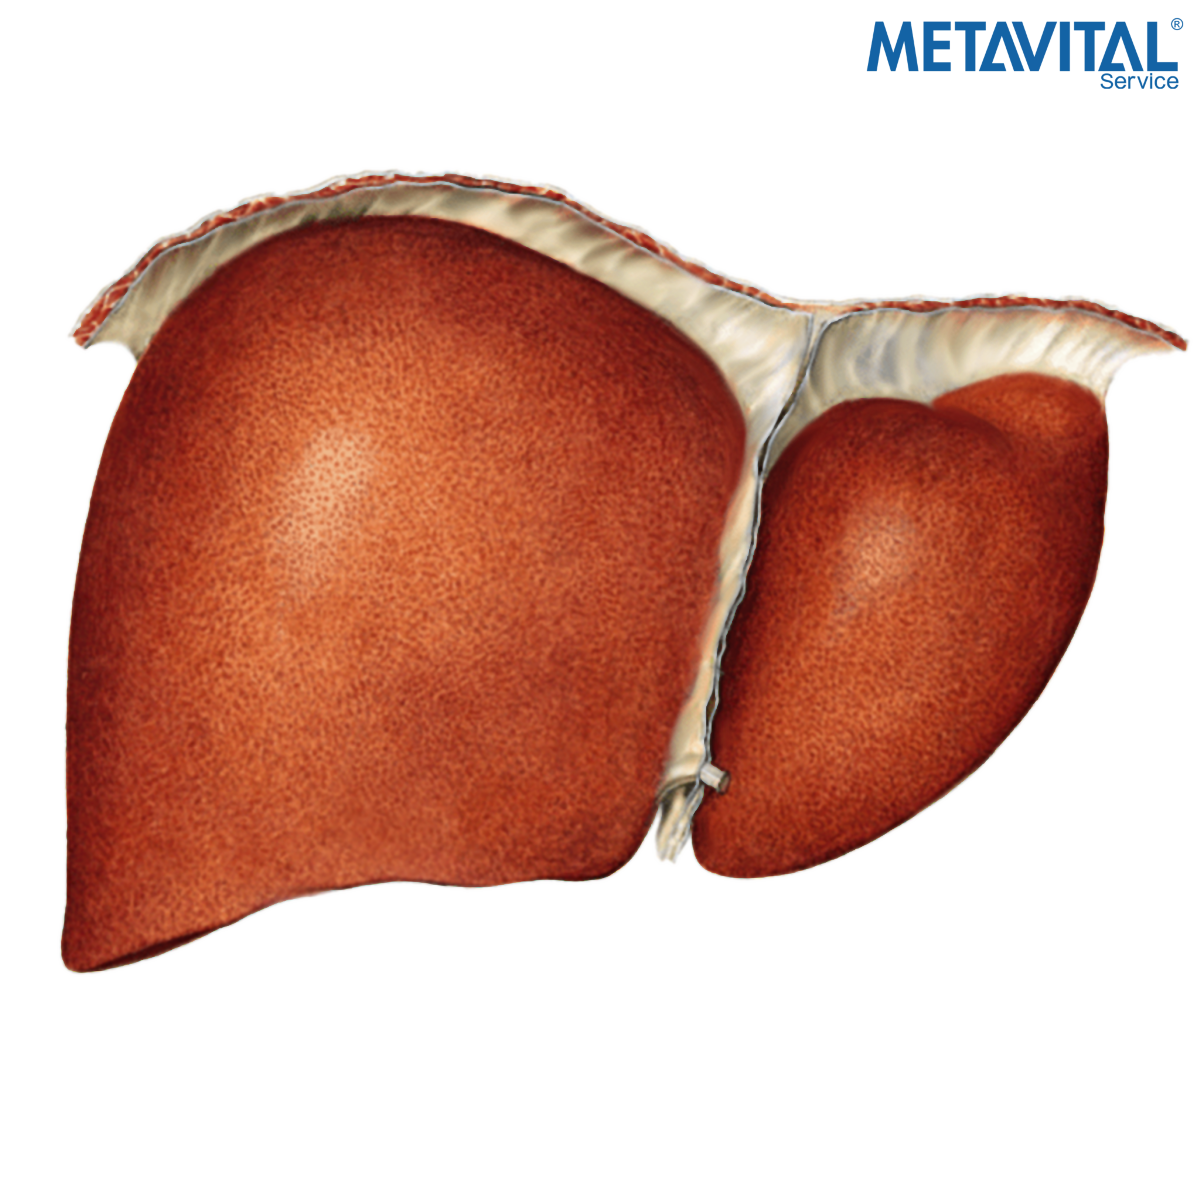 _The-liver-and-porta-hepatis